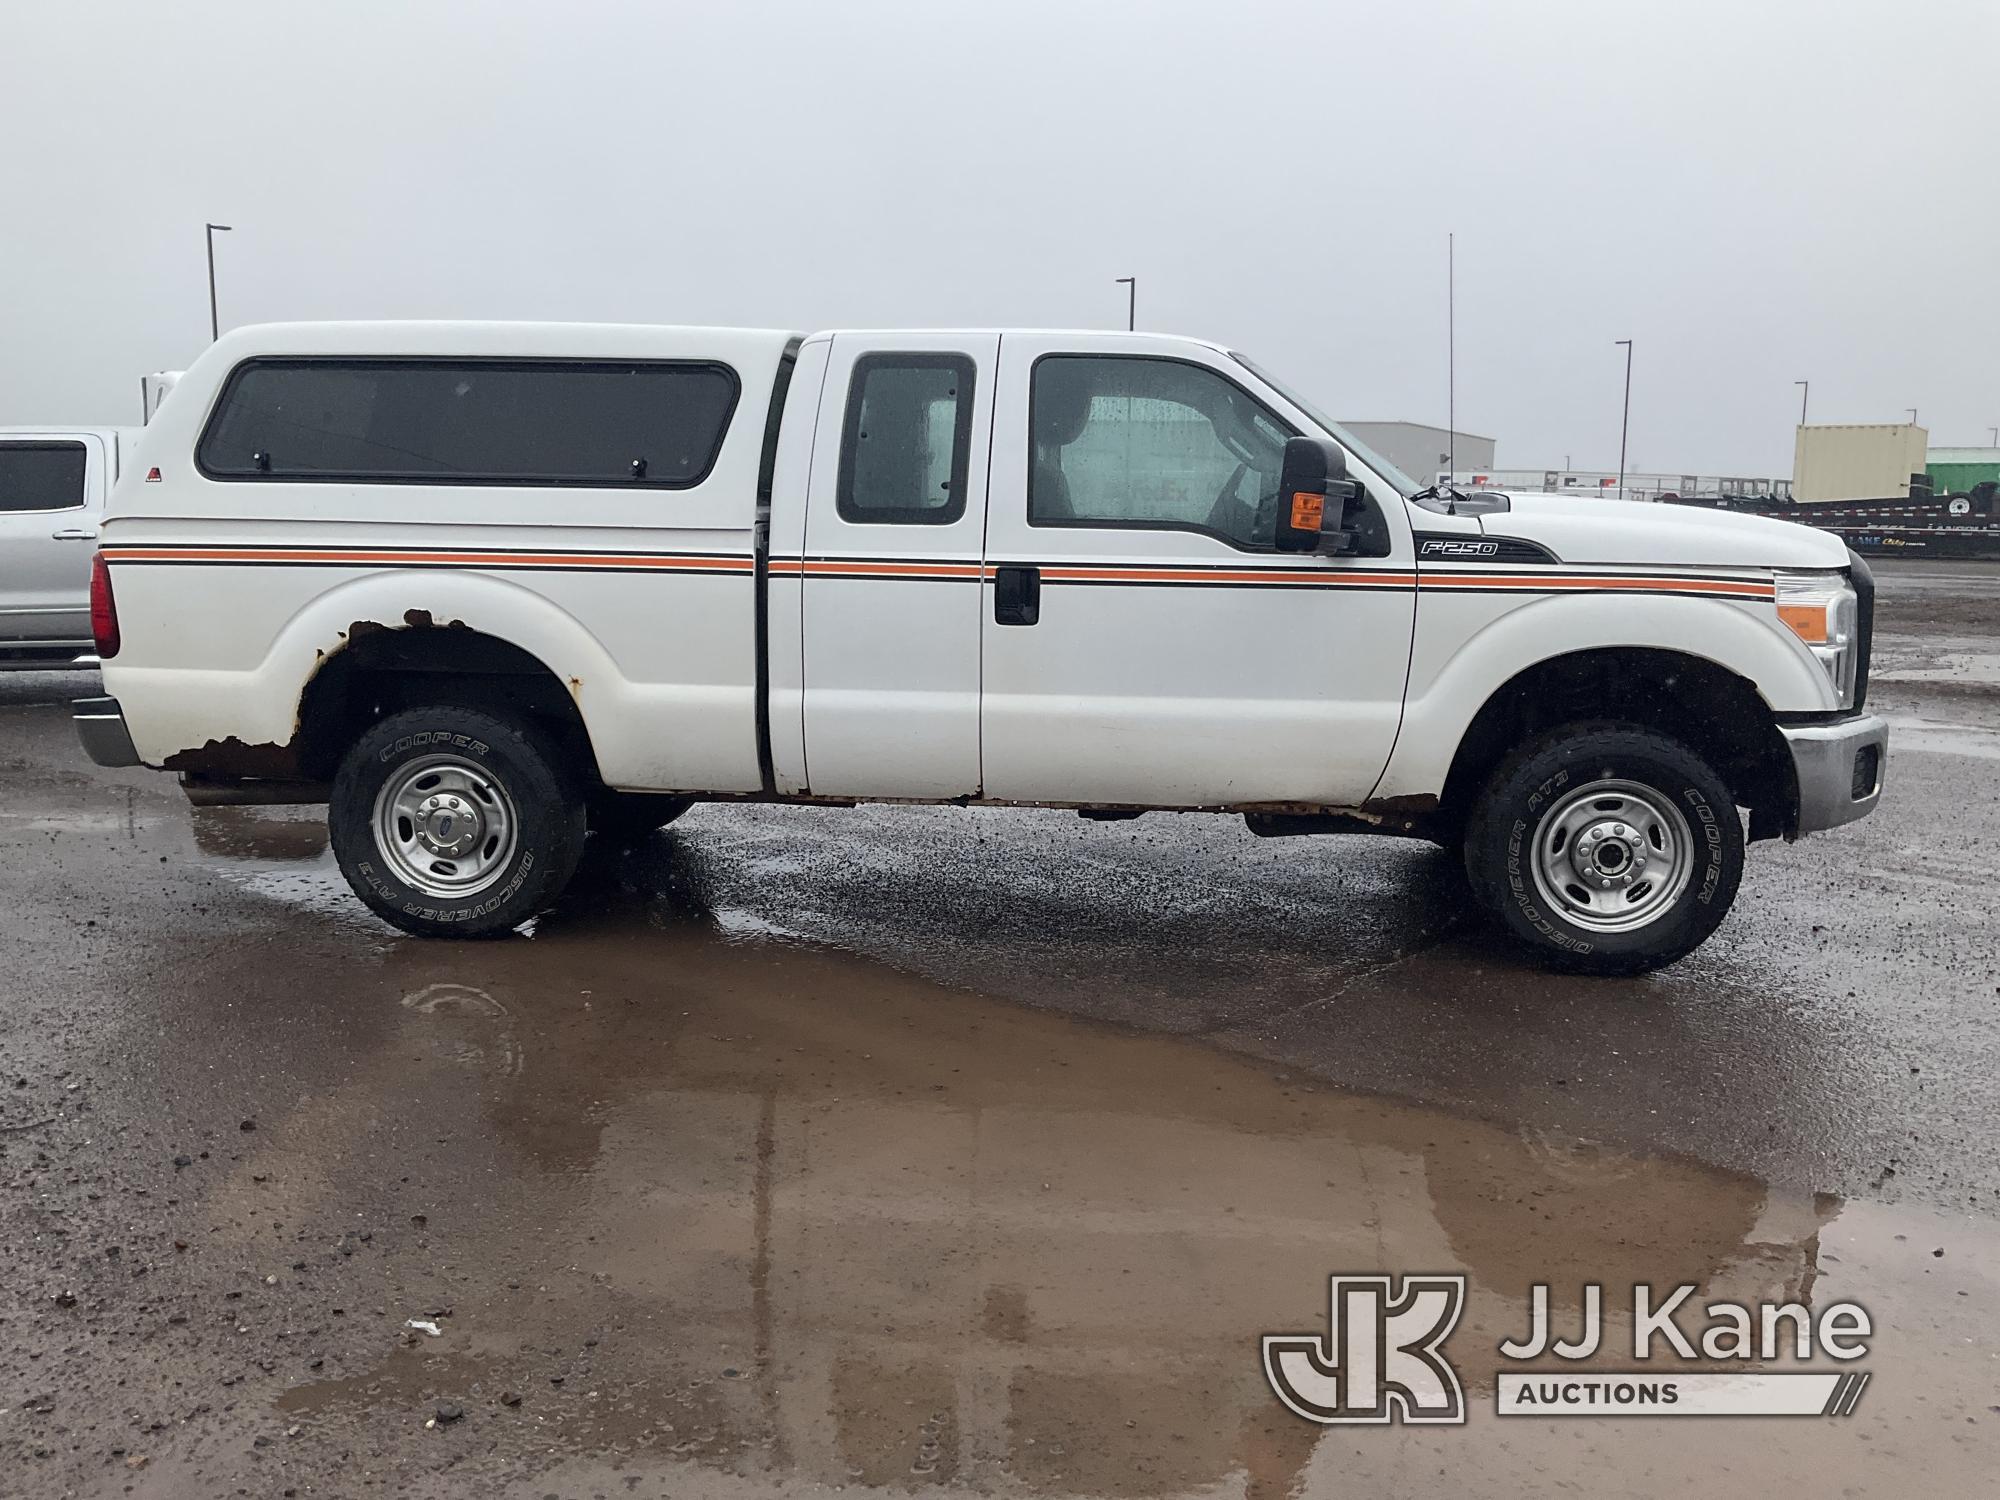 (Superior, WI) 2016 Ford F250 Extended-Cab Pickup Truck, Needs Radiator, Power Steering Pump, Altern